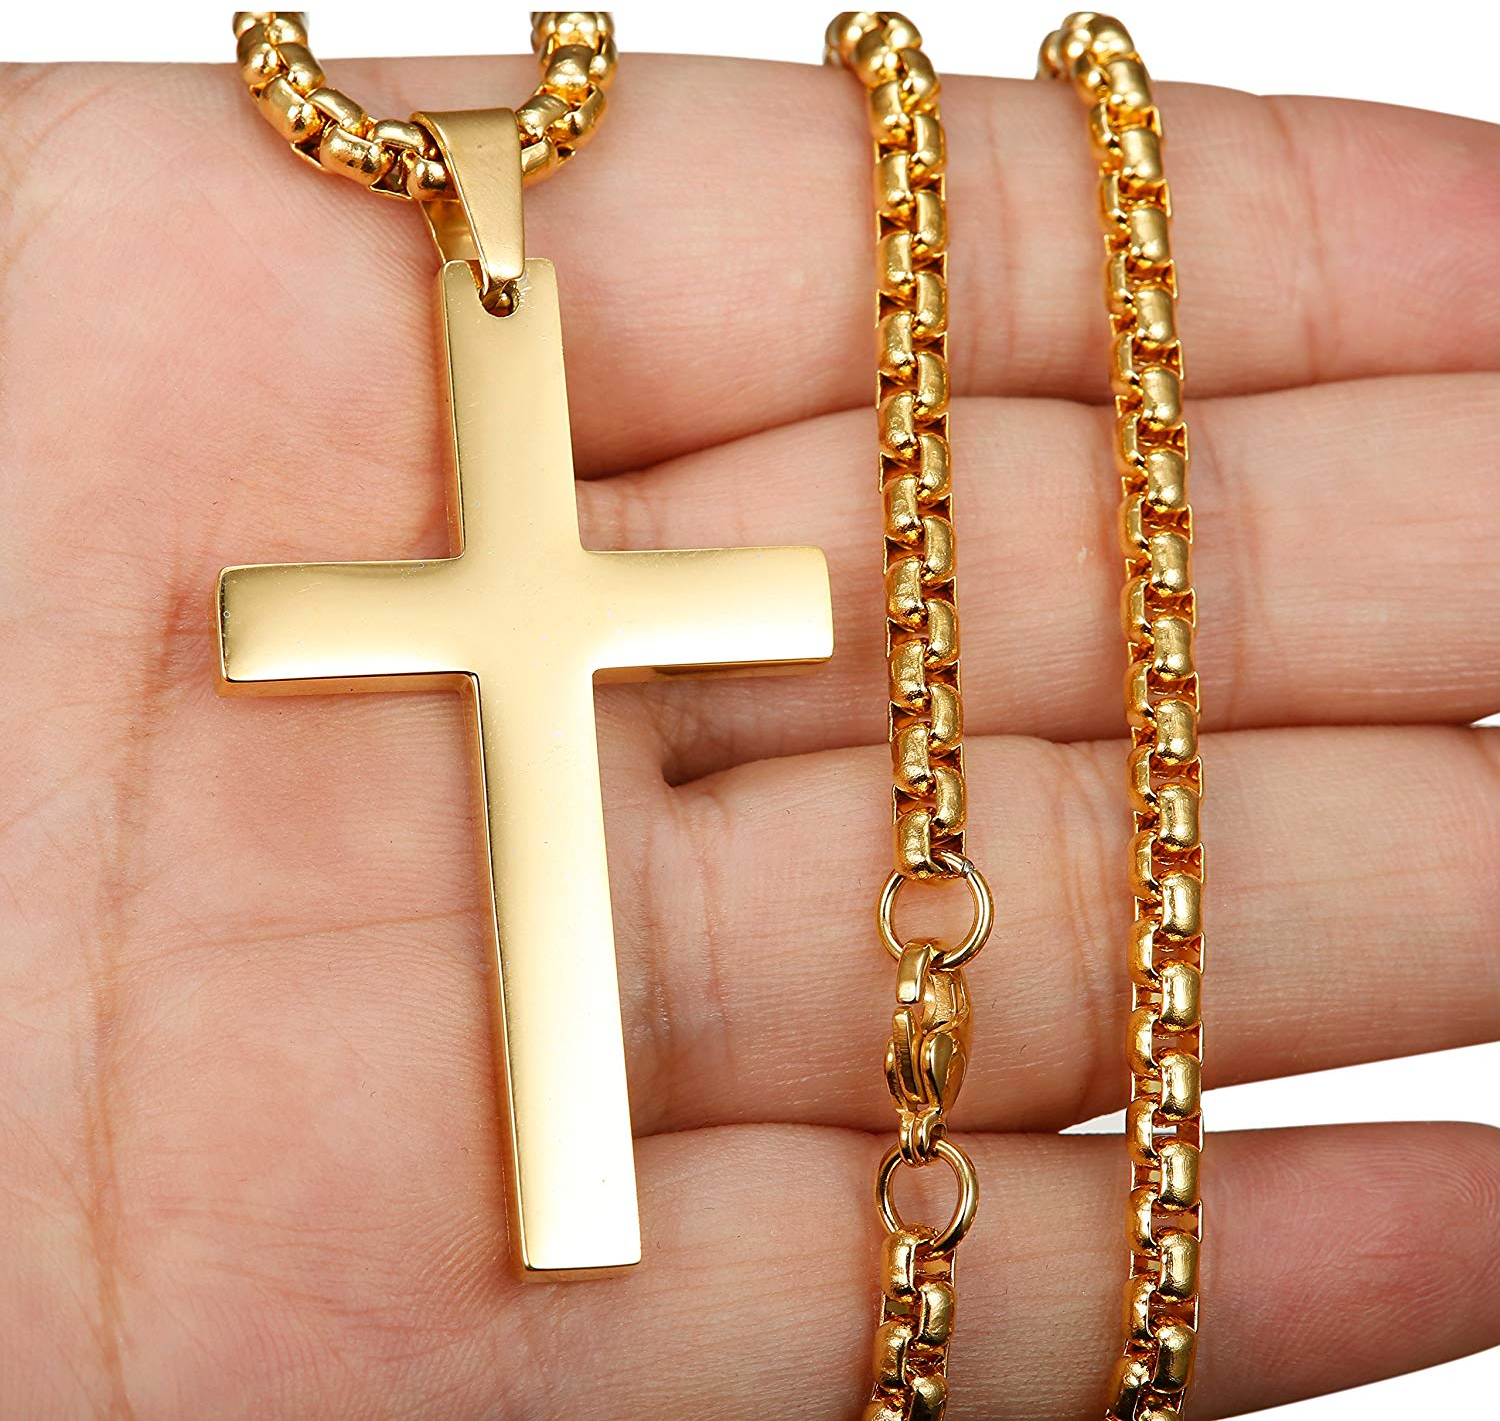 Jstyle Jewelry Mens Cross Necklace For Men Women Stainless Steel Pendant 24 Inch Chains 1377